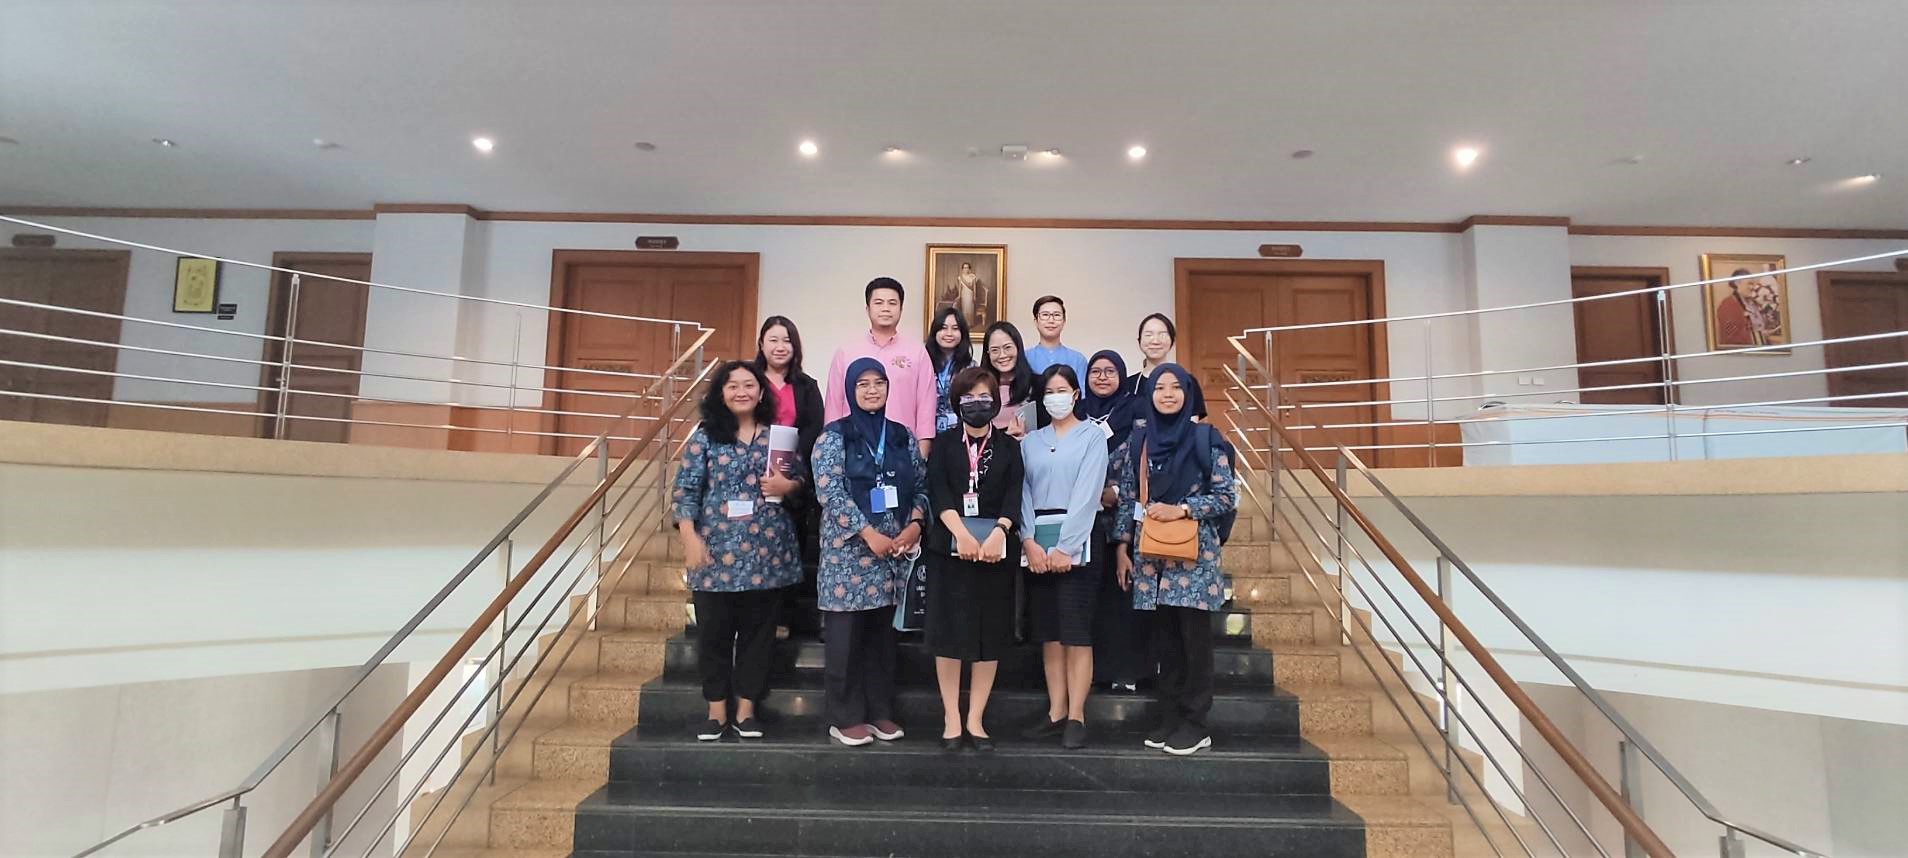 A Visit from Participants of Non-Academic Staff Mobility Programme, Institut Teknologi Sepuluh Nopember (ITS)